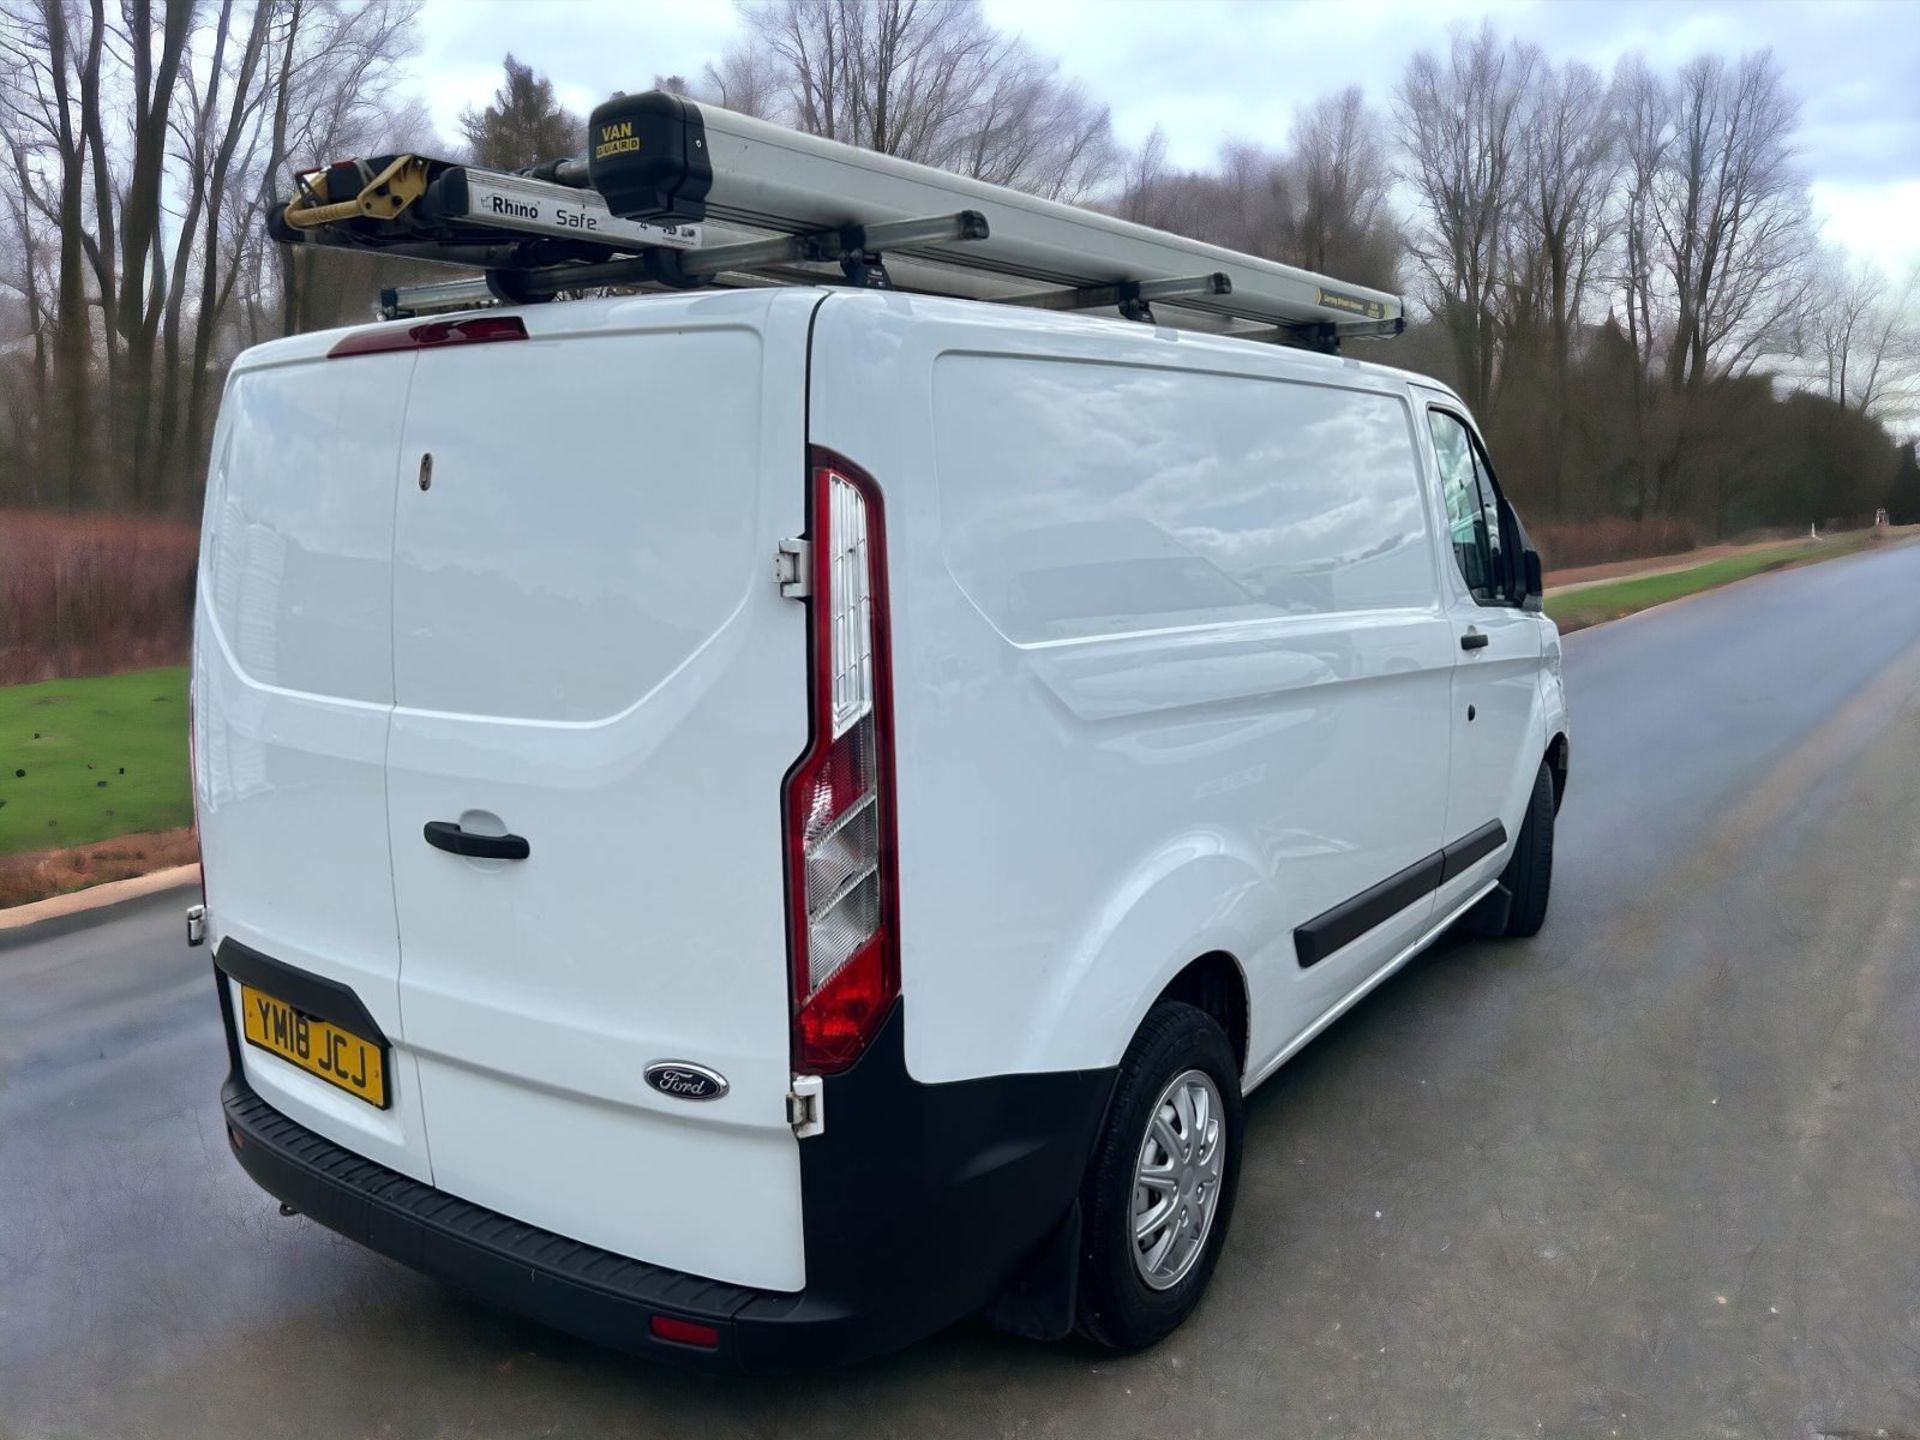 2018-18 REG FORD TRANSIT CUSTOM 280 SWB L1H1- HPI CLEAR - READY FOR ACTION ! - Image 4 of 15